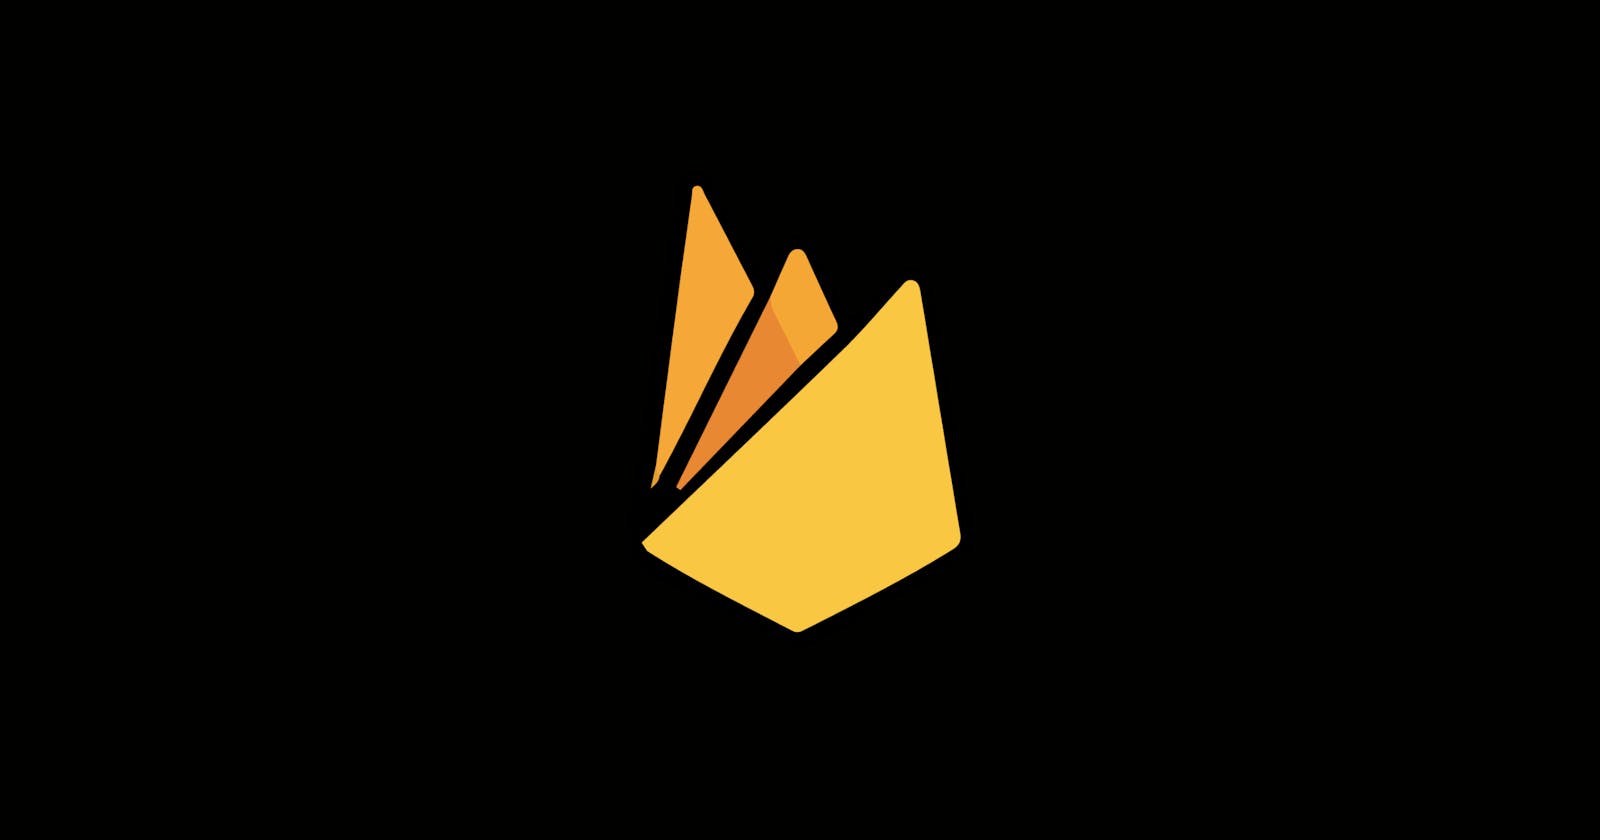 Firebase Features to Help Businesses Grow Online